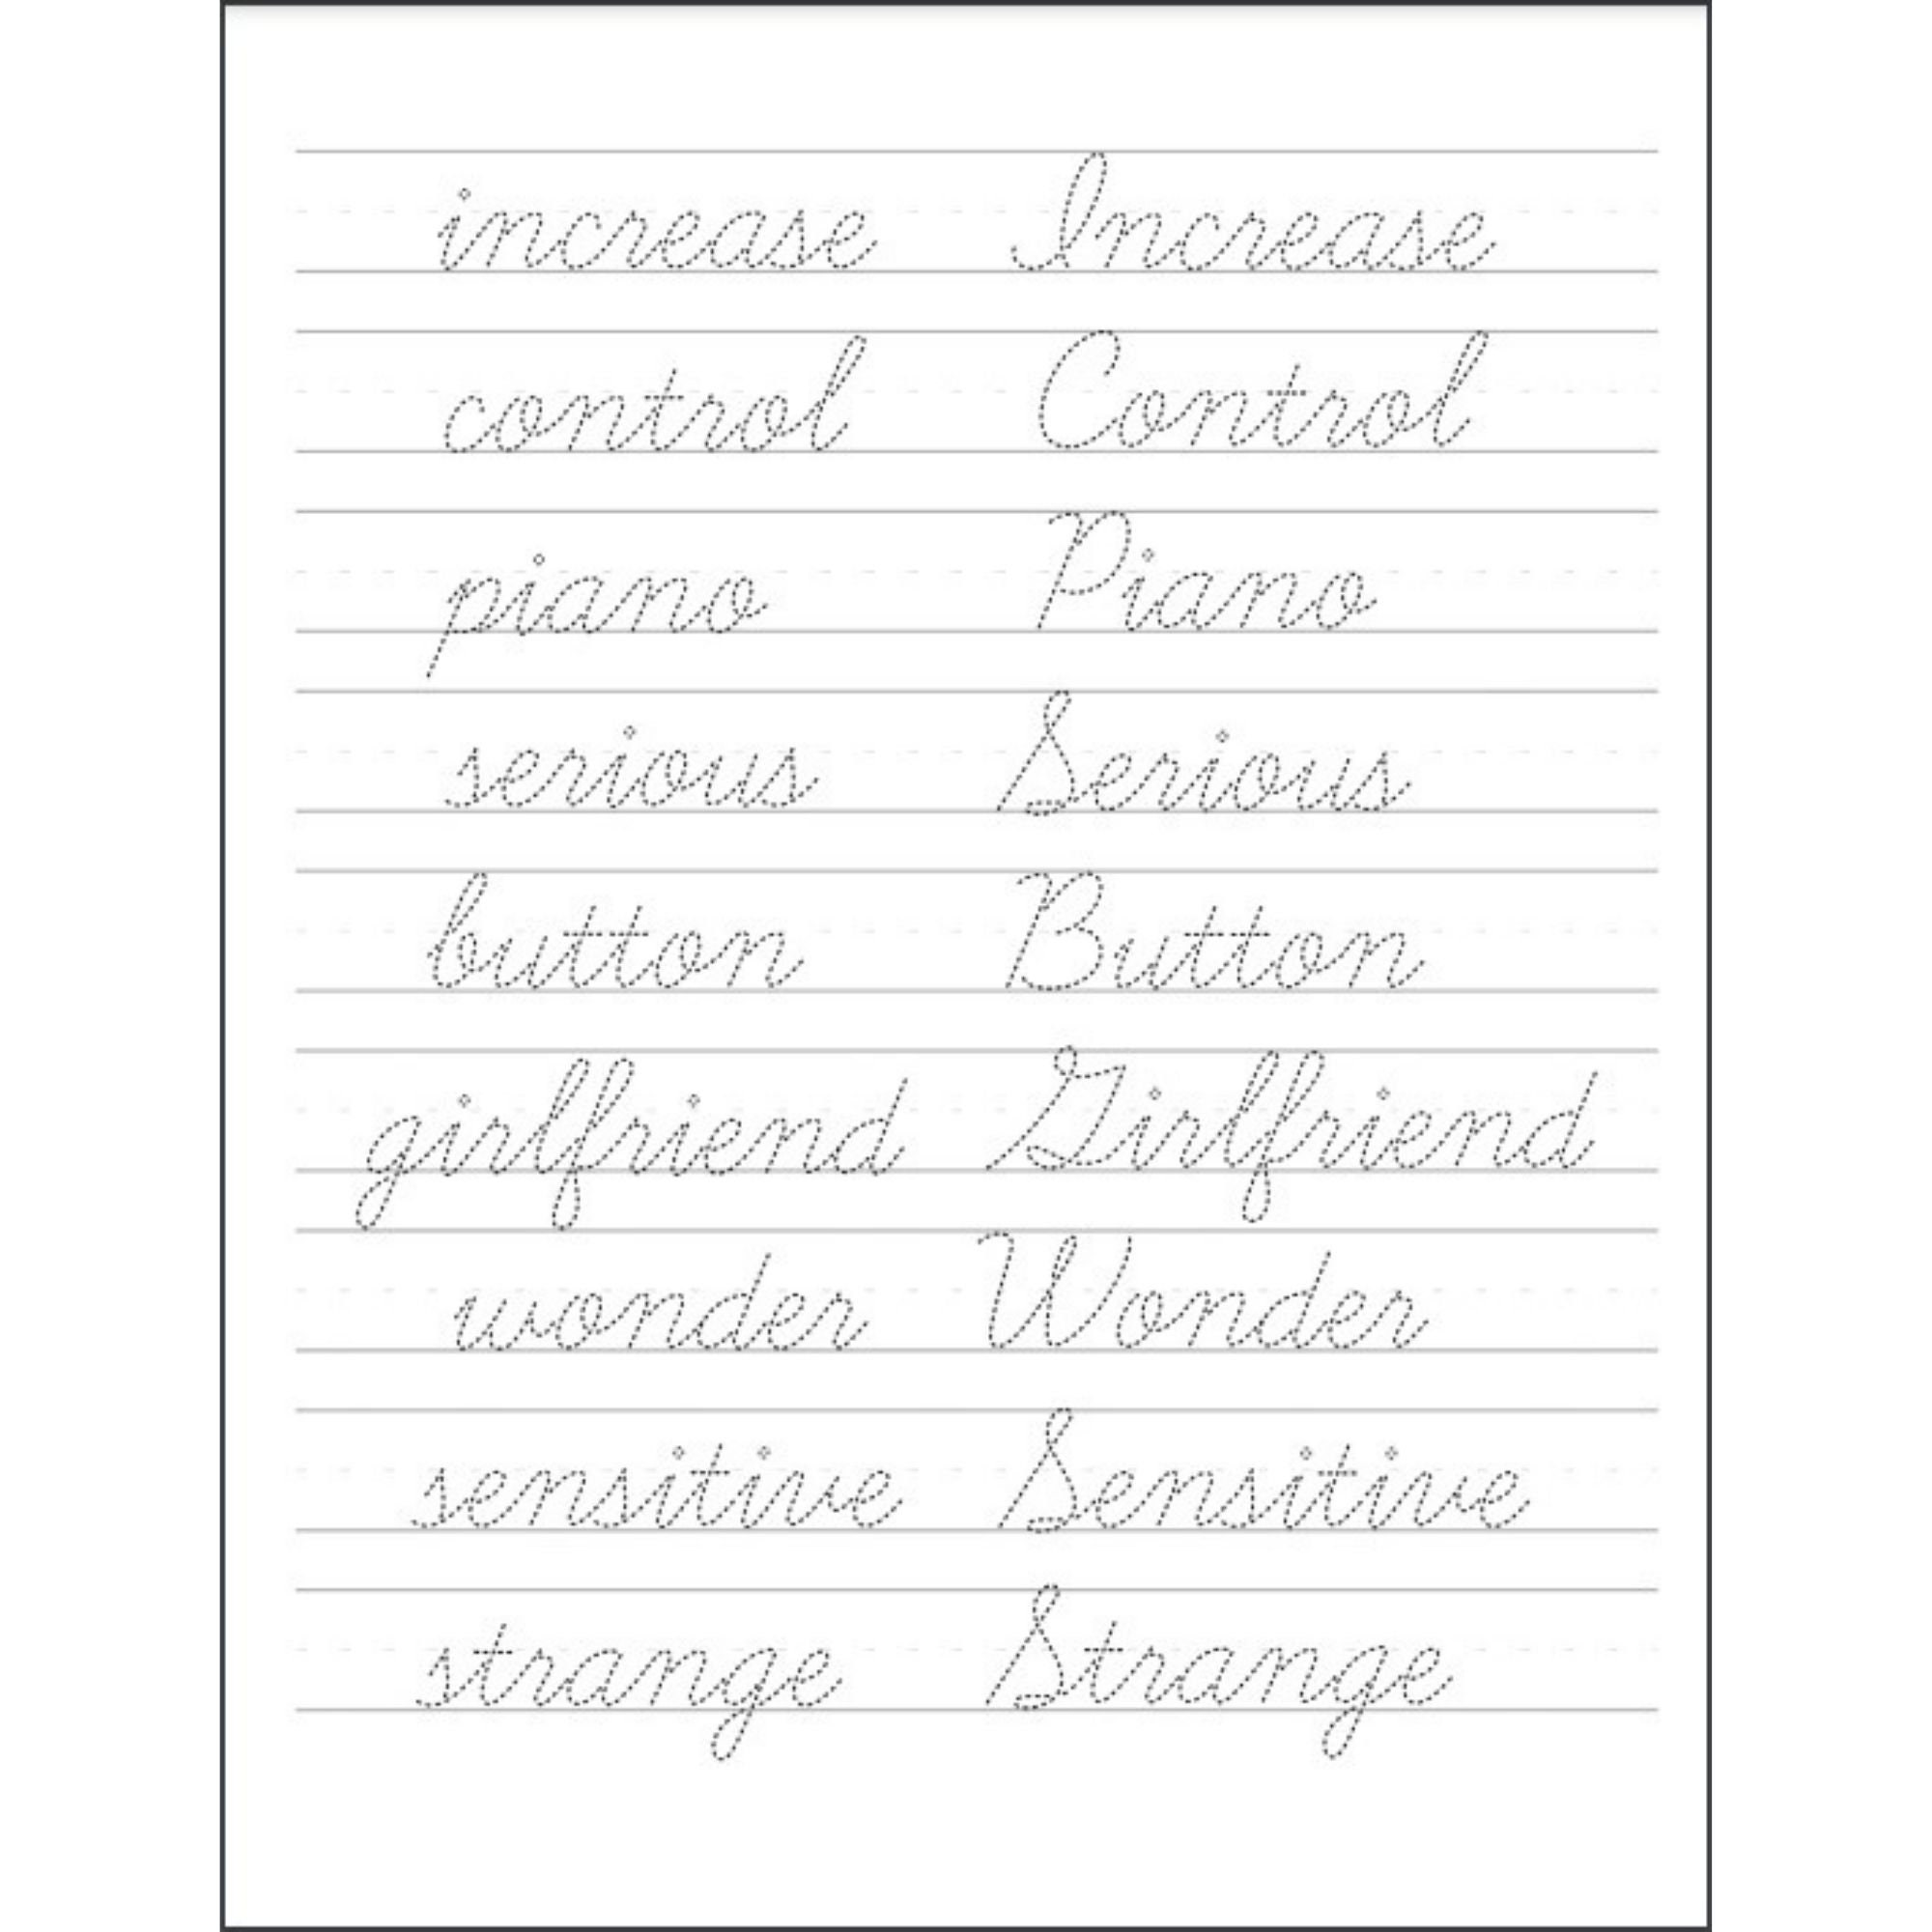 Dysgraphia: Handwriting Workbook for Kids. Tracing Tasks, Writing EXERCICES, Spelling Words, Missing Letters, Counting Syllables, and crosswords.